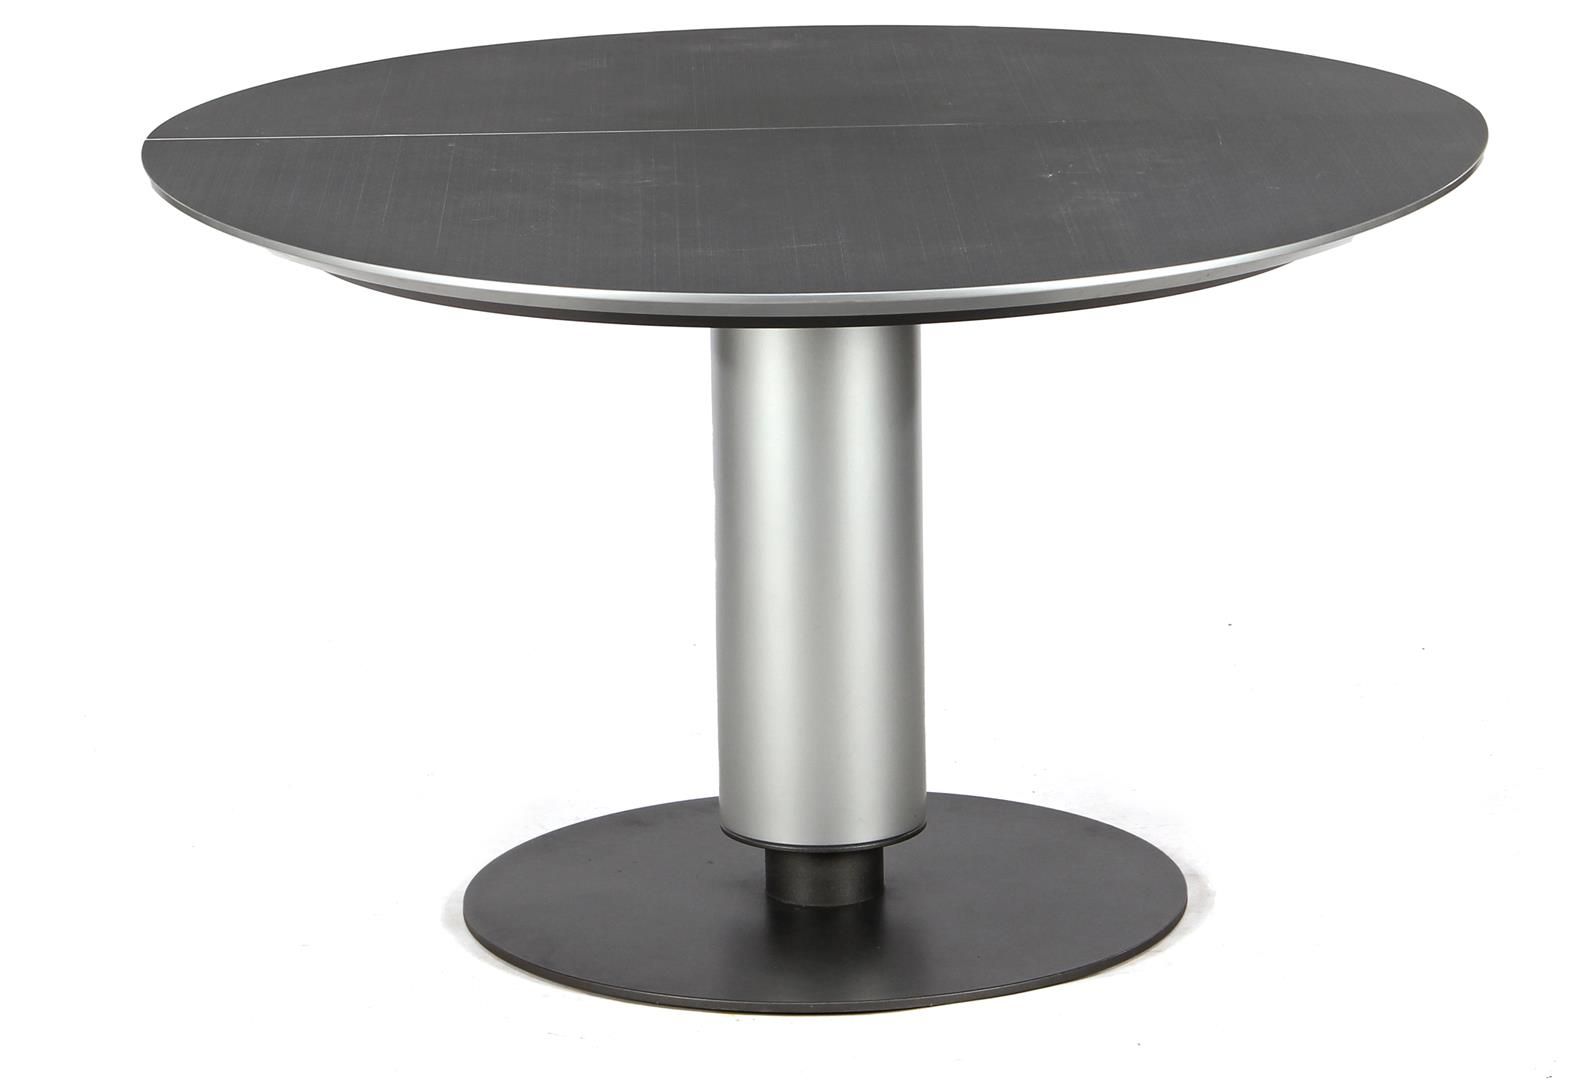 Leolux Caldera 566 table Leolux Caldera 566 table with silver-coloured wooden to&hellip;